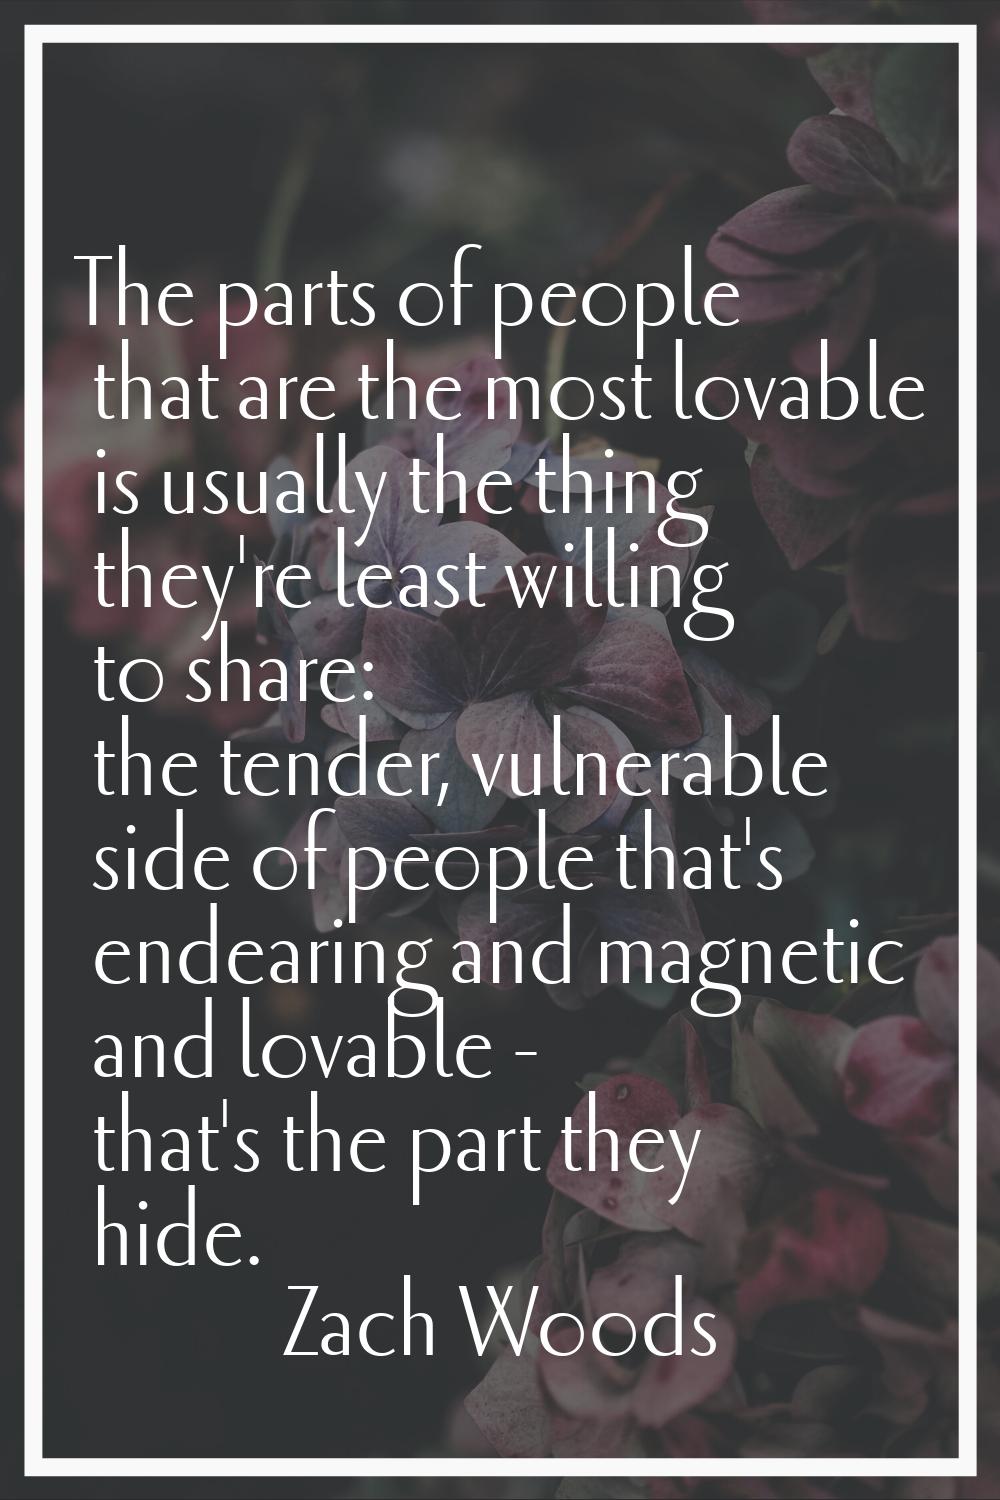 The parts of people that are the most lovable is usually the thing they're least willing to share: 